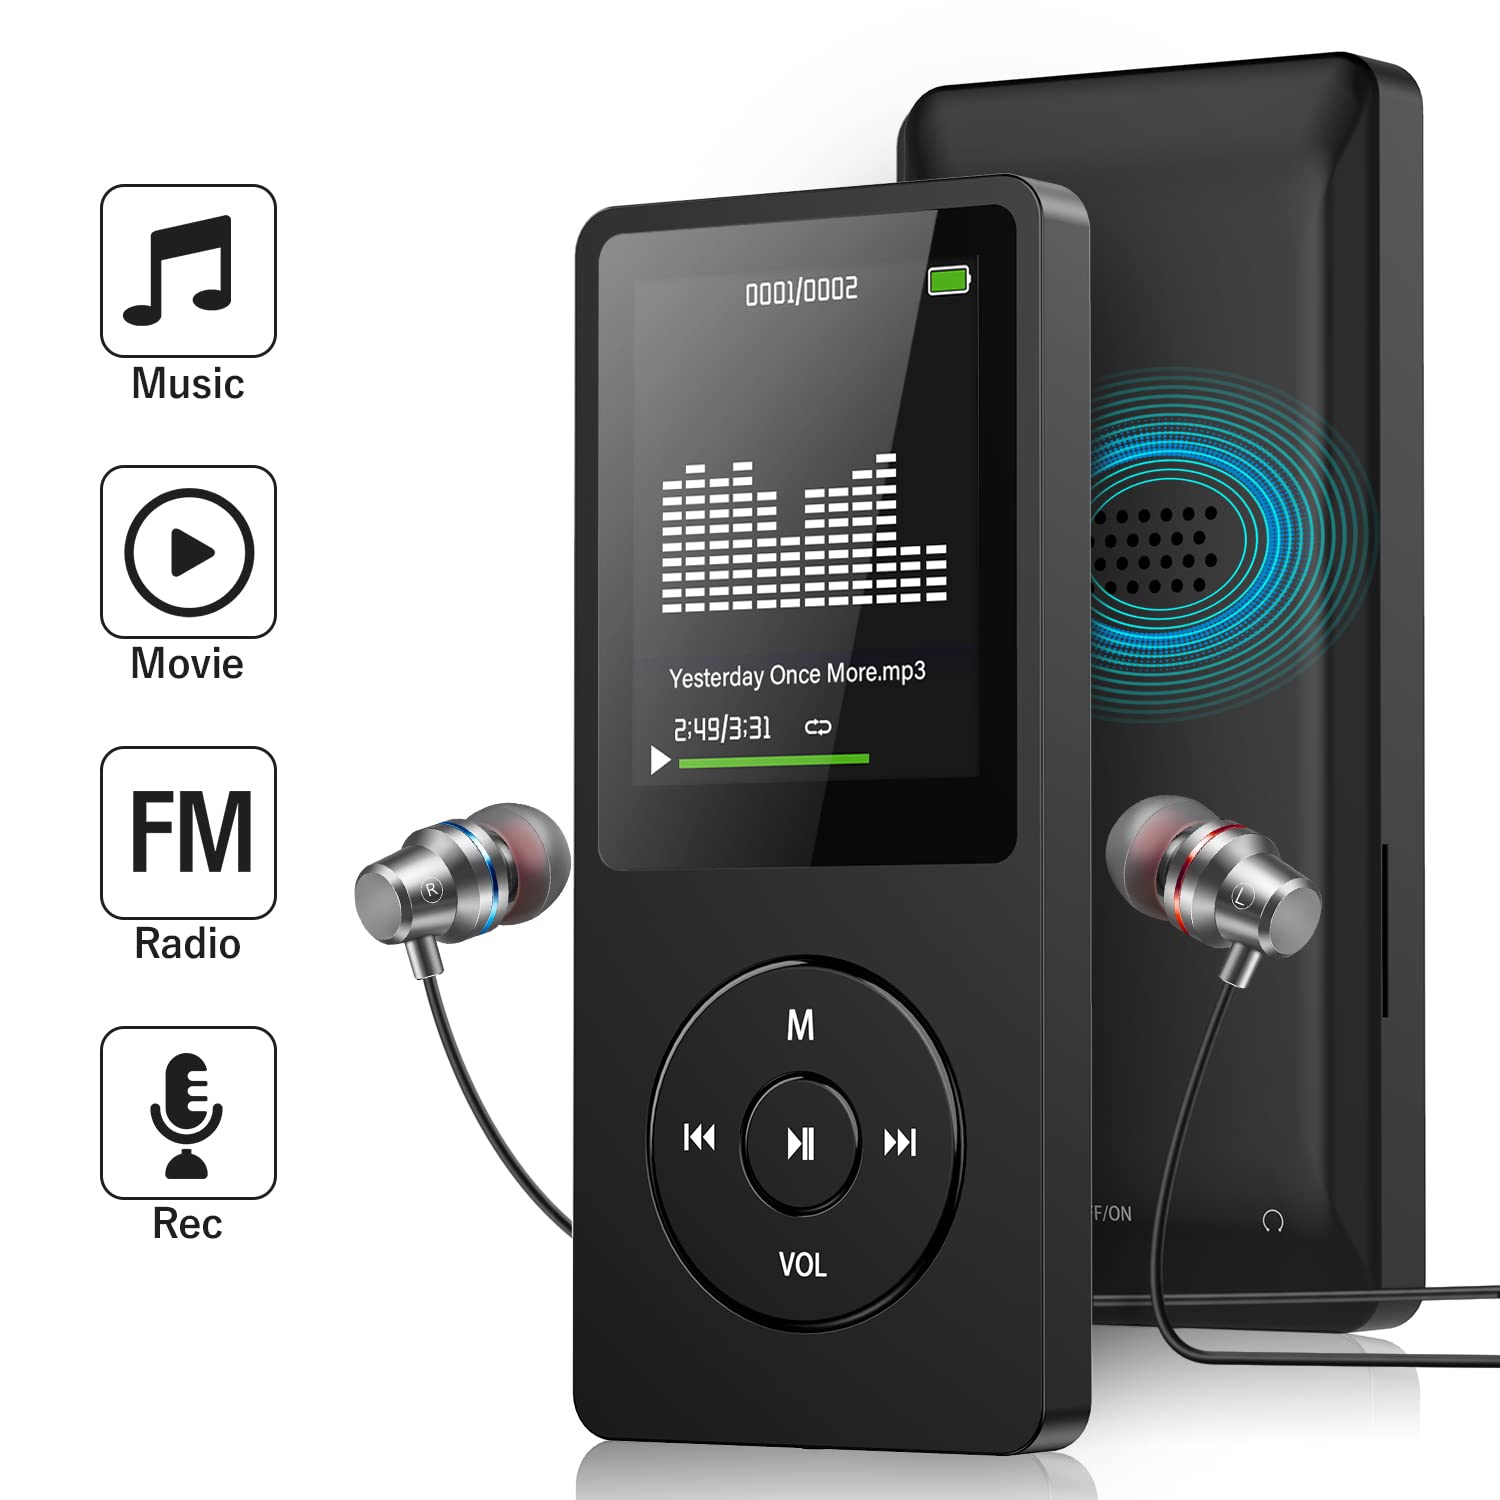 64GB MP3 Player with FM Radio and Voice Recorder, Ultra Slim Music Player with Video Play Text Reading and Build-in Speaker Support up to 128GB, Earphone Included (Black)